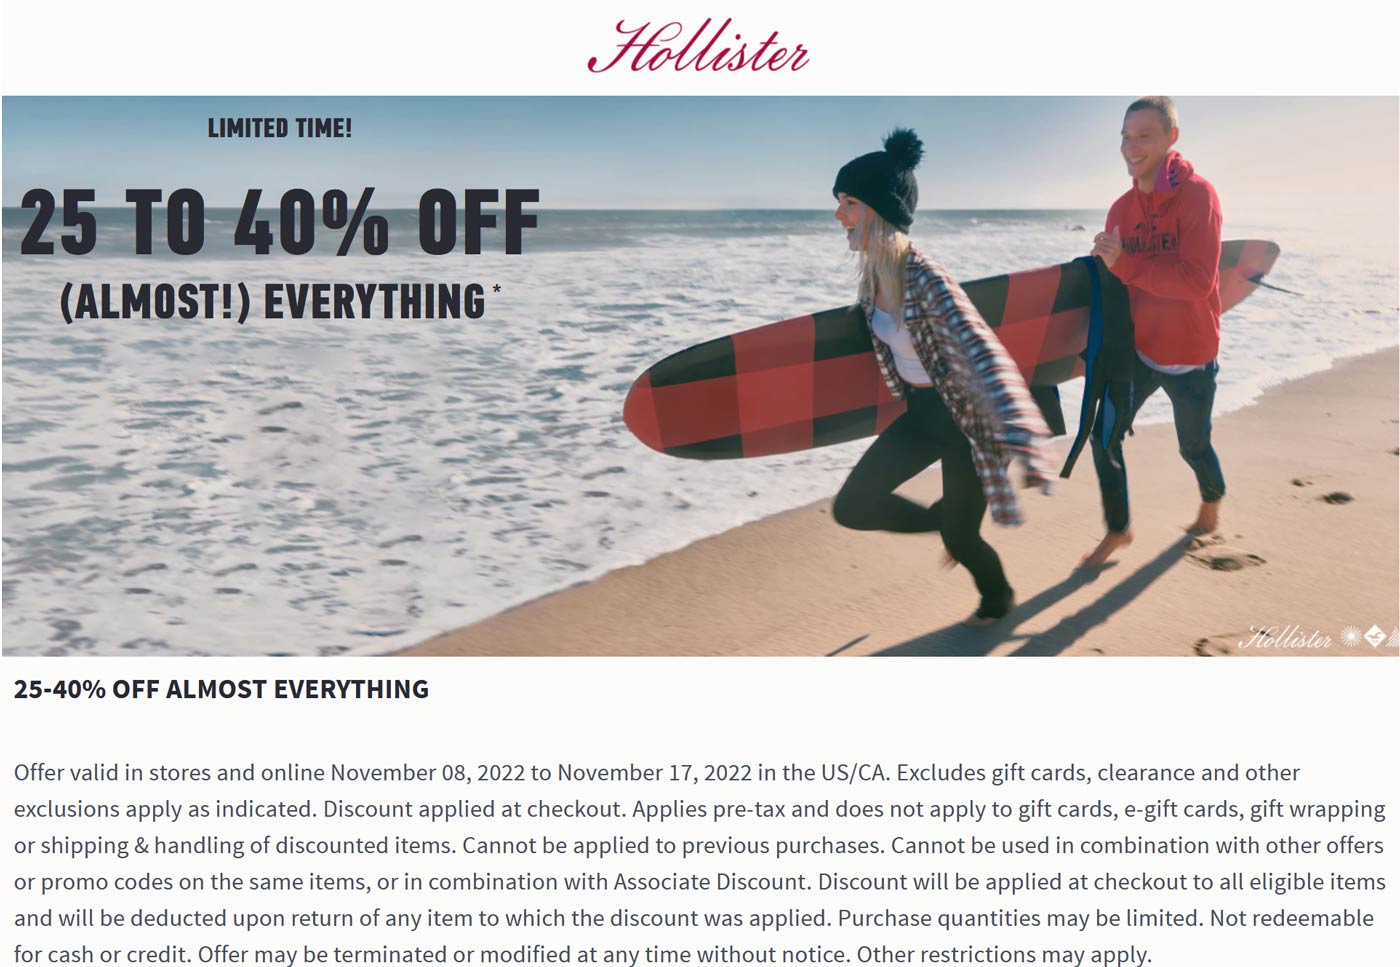 Hollister coupons & promo code for [November 2022]